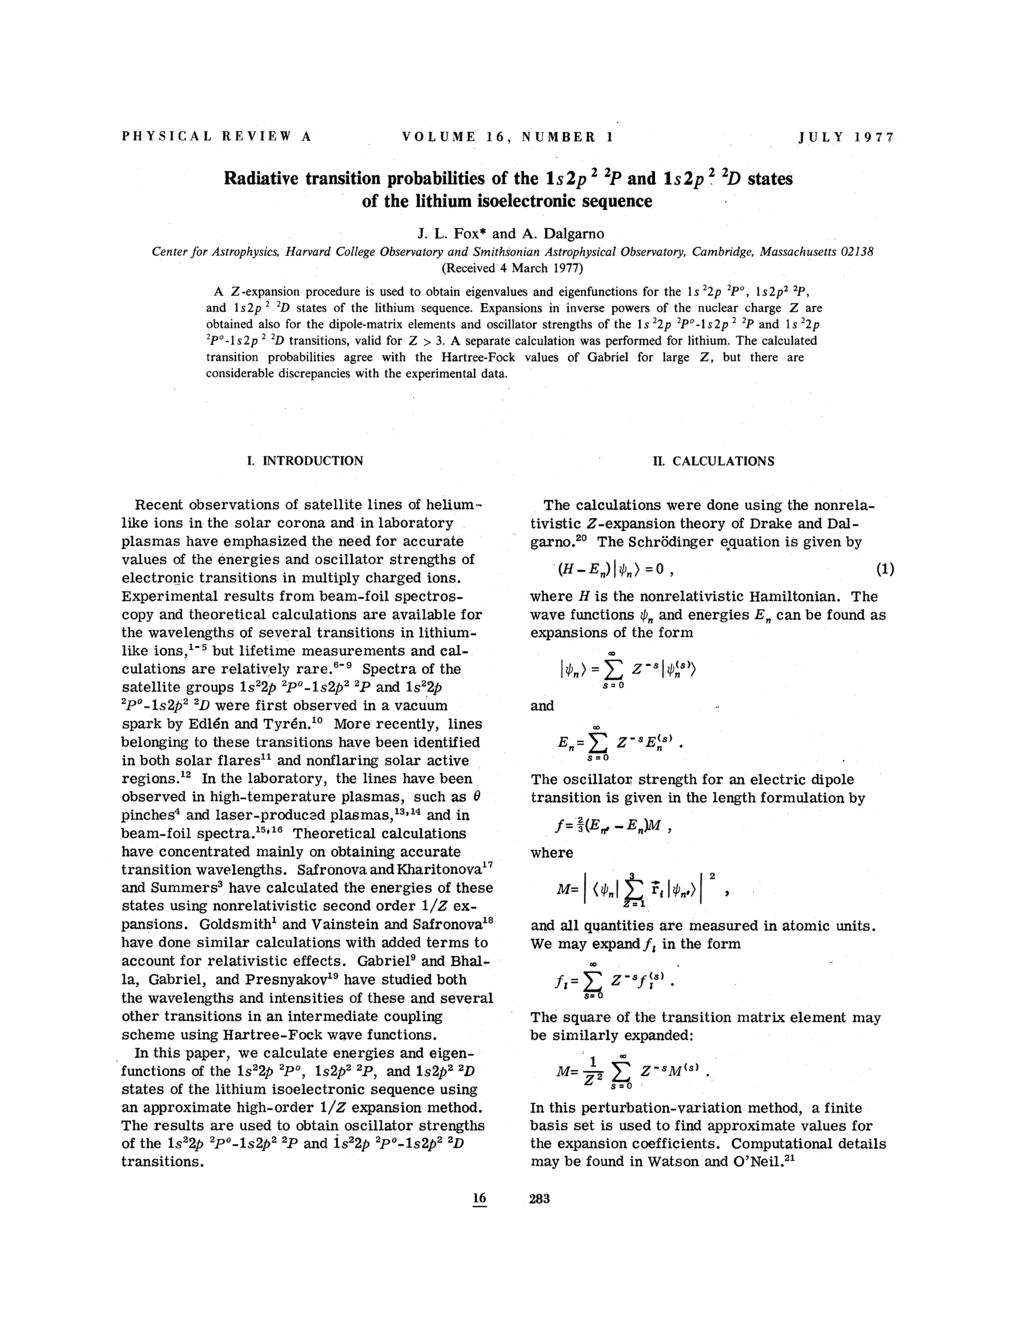 PHYSICAL REVIEW A VOLUME 16, NUMBER 1 JULY 1977 Radiative transition probabilities of the ls2p 2 2 P and ls2p ~ 2D states of the lithium isoelectronic sequence J. L. Fox* and A.